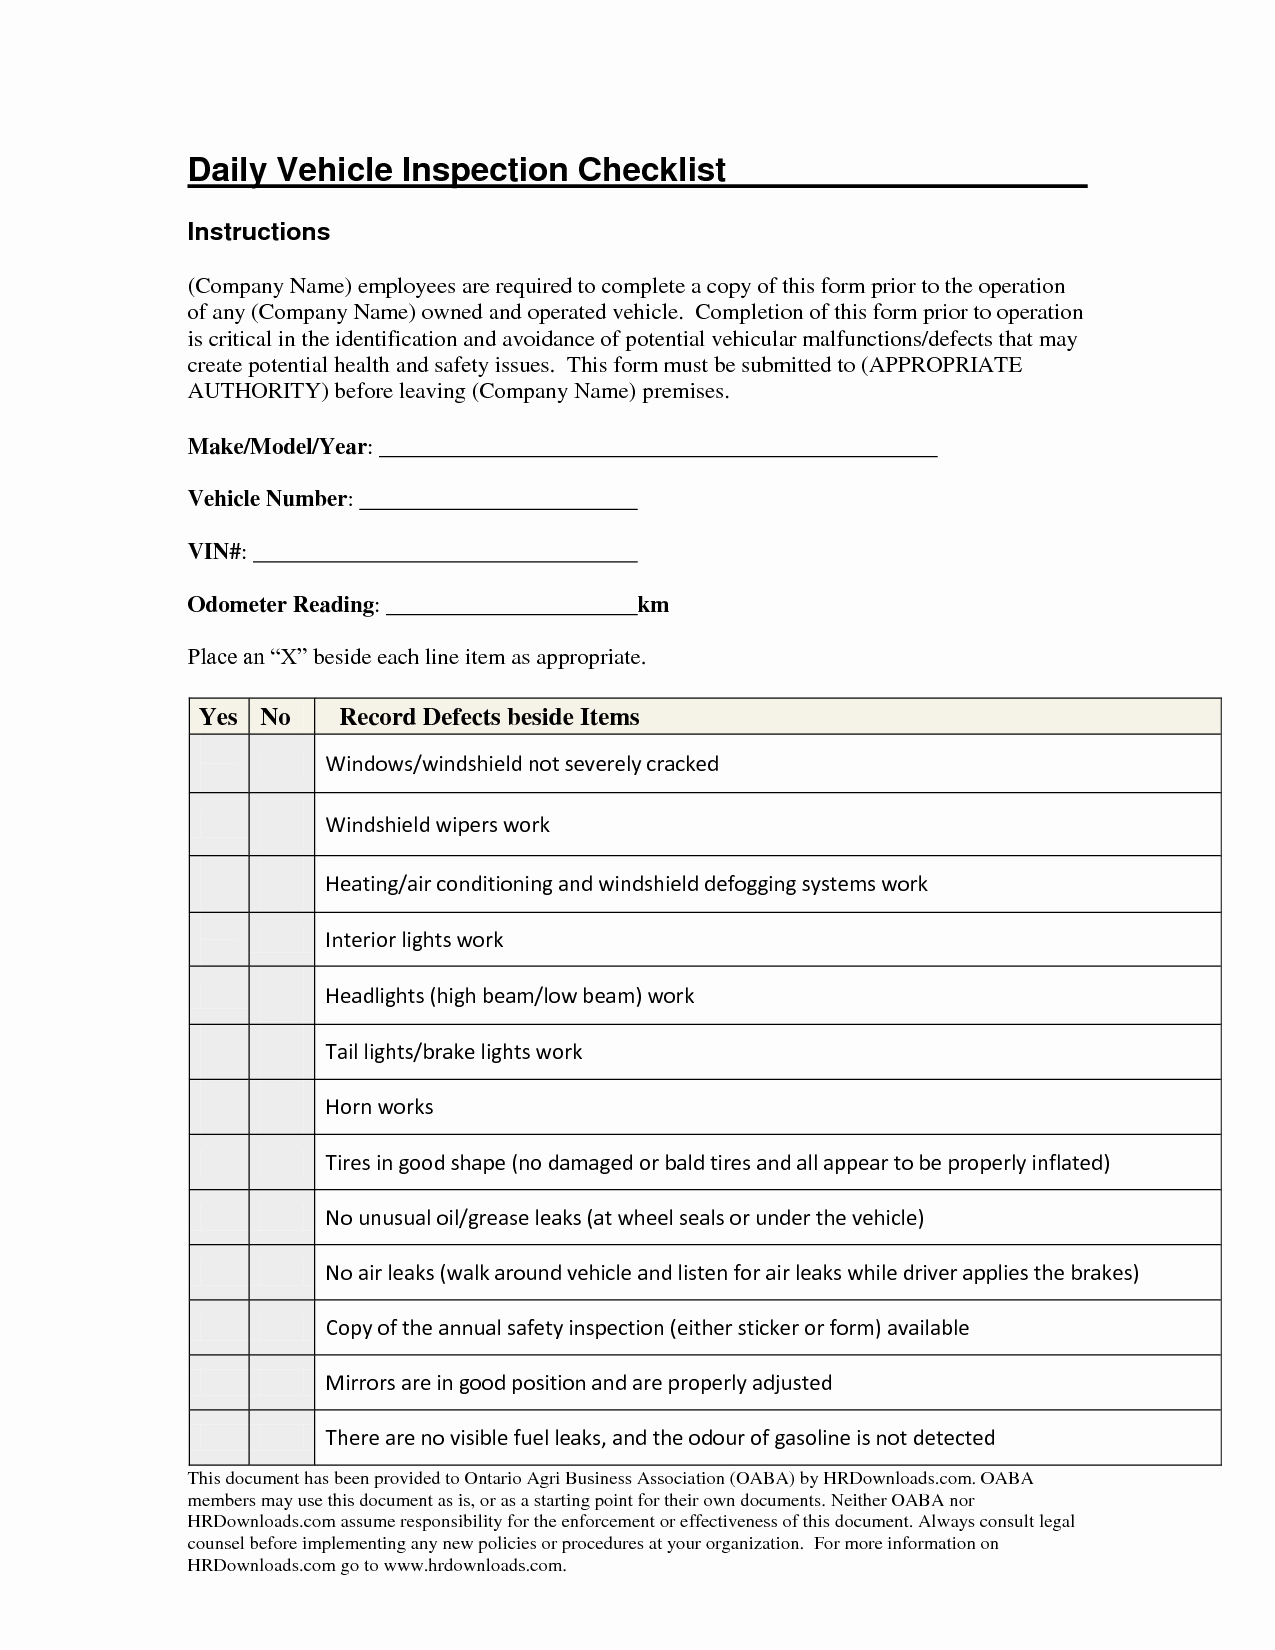 Daily Vehicle Inspection form Template Unique Daily Vehicle Inspection Checklist form Image Gallery Gyps Fice forms